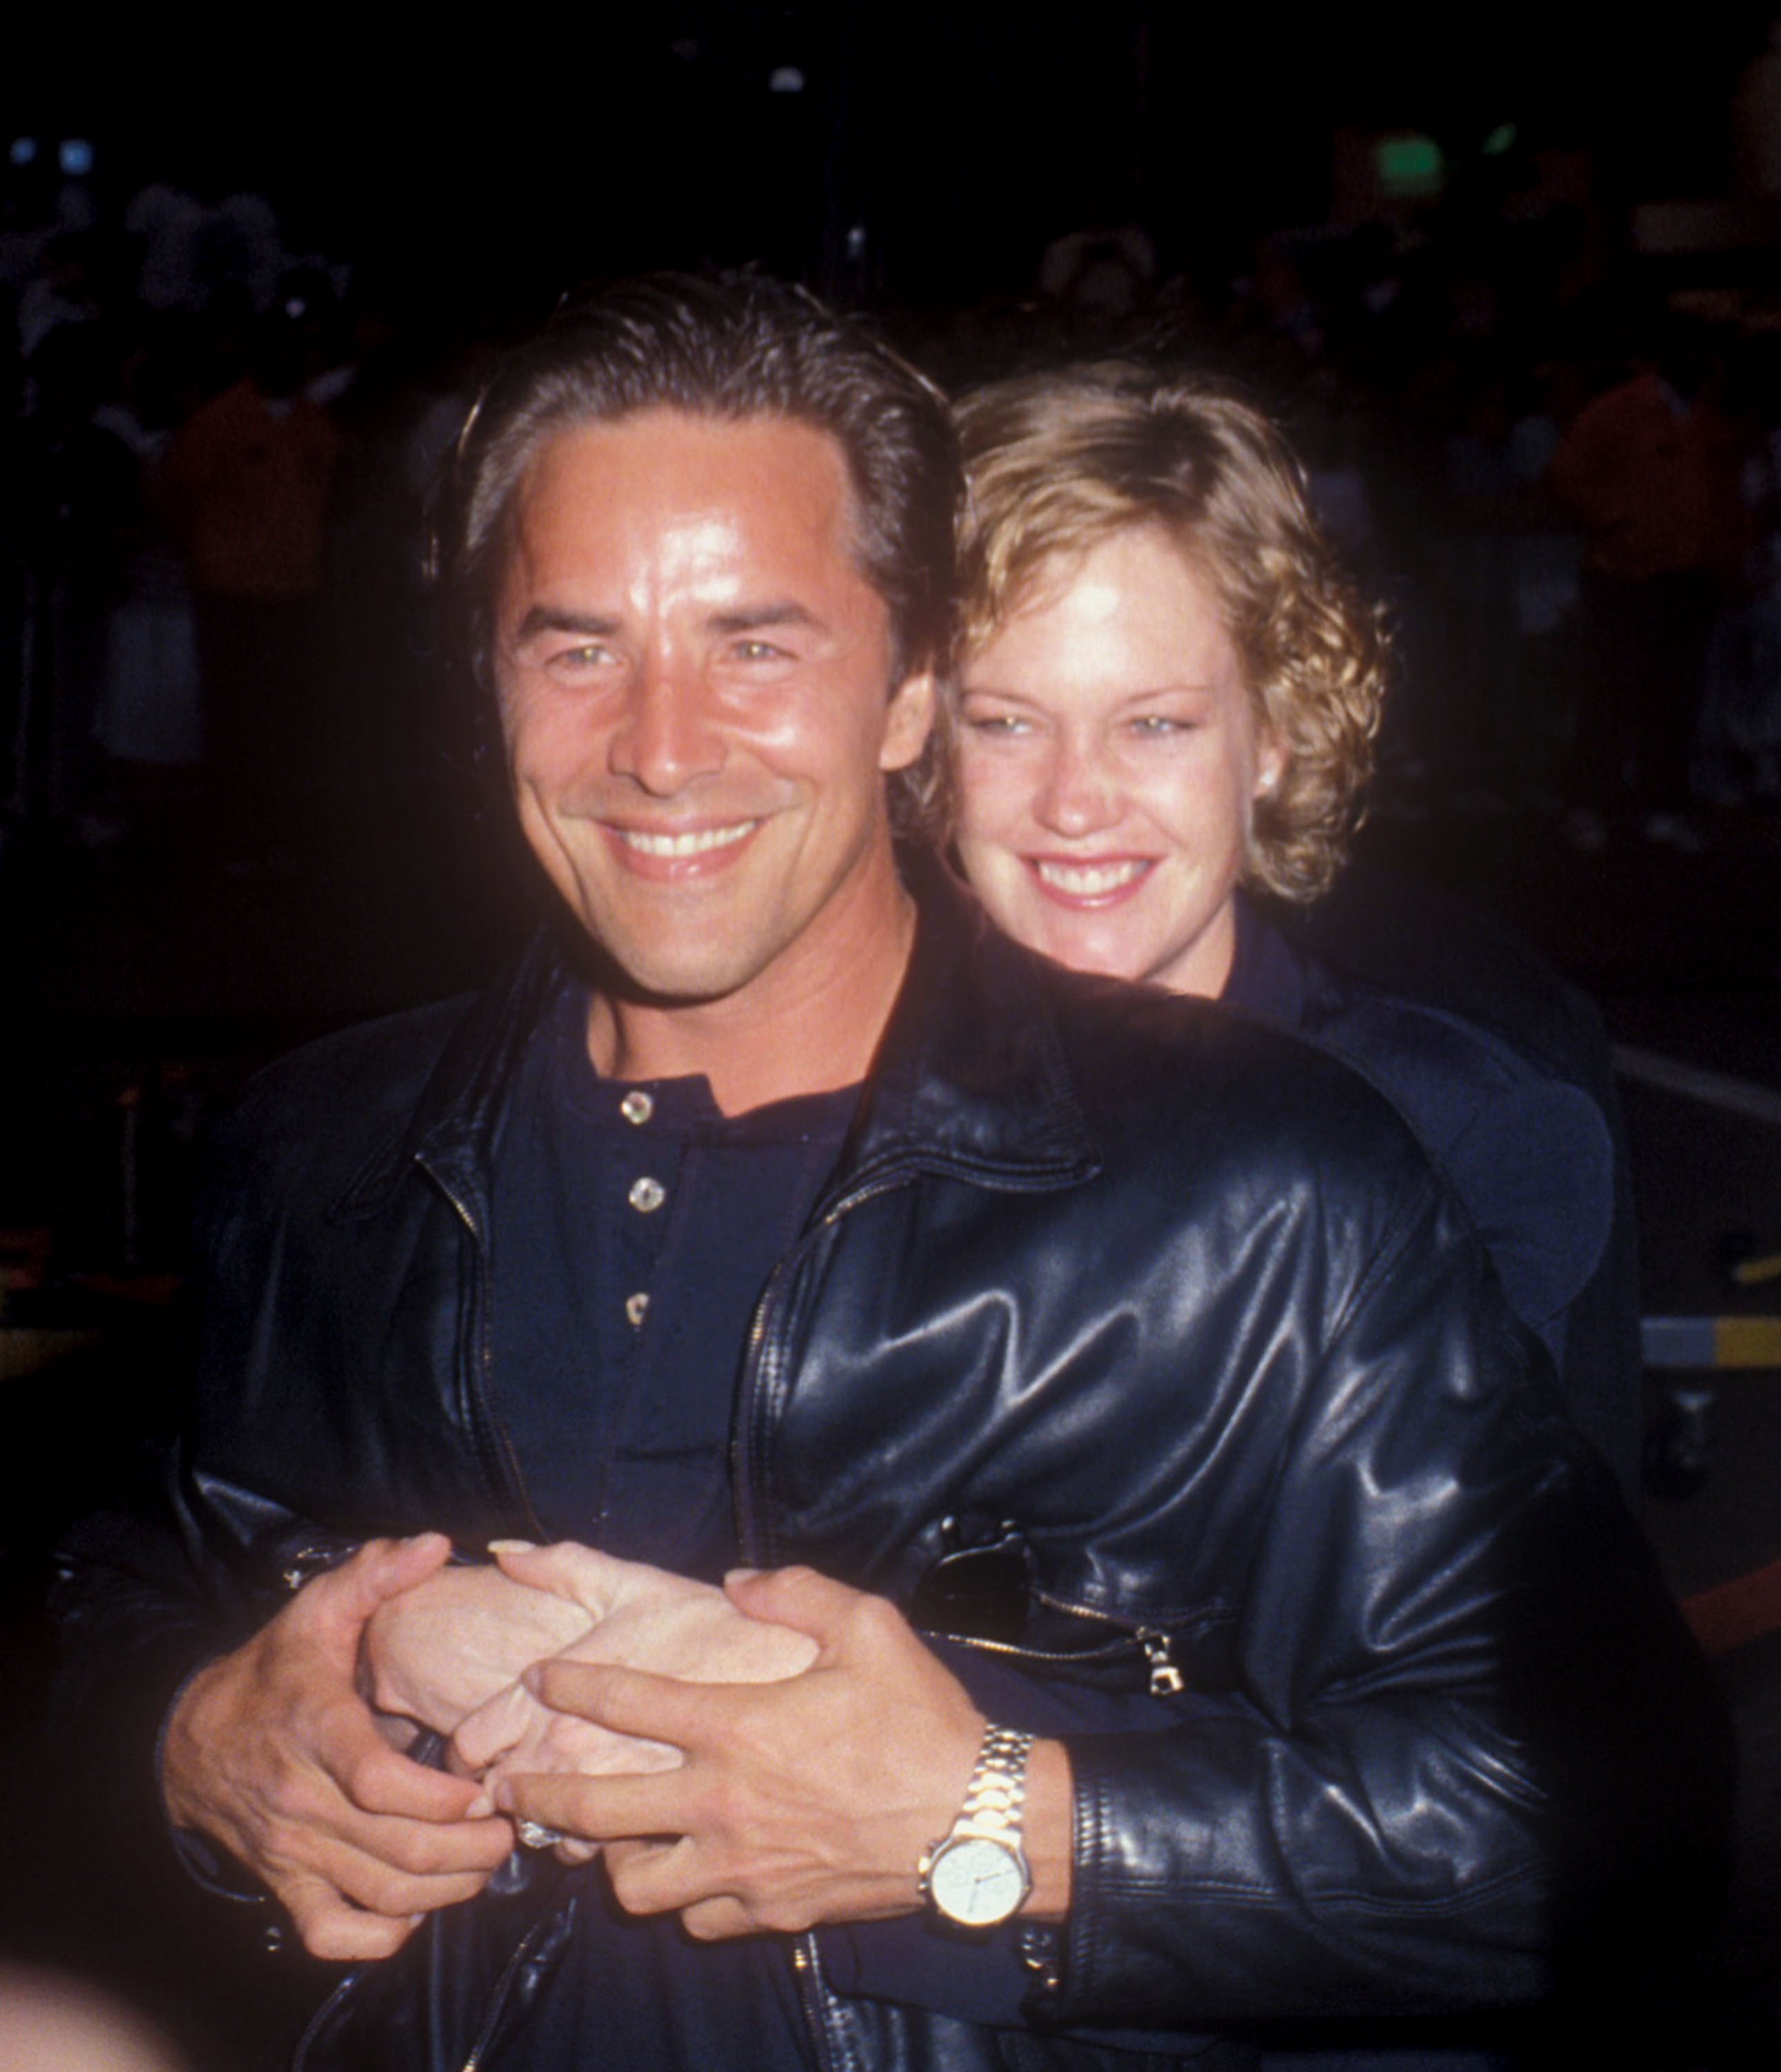 Actor Don Johnson and actress Melanie Griffith attend the "Batman" premiere in Los Angeles. | Source: Getty Images